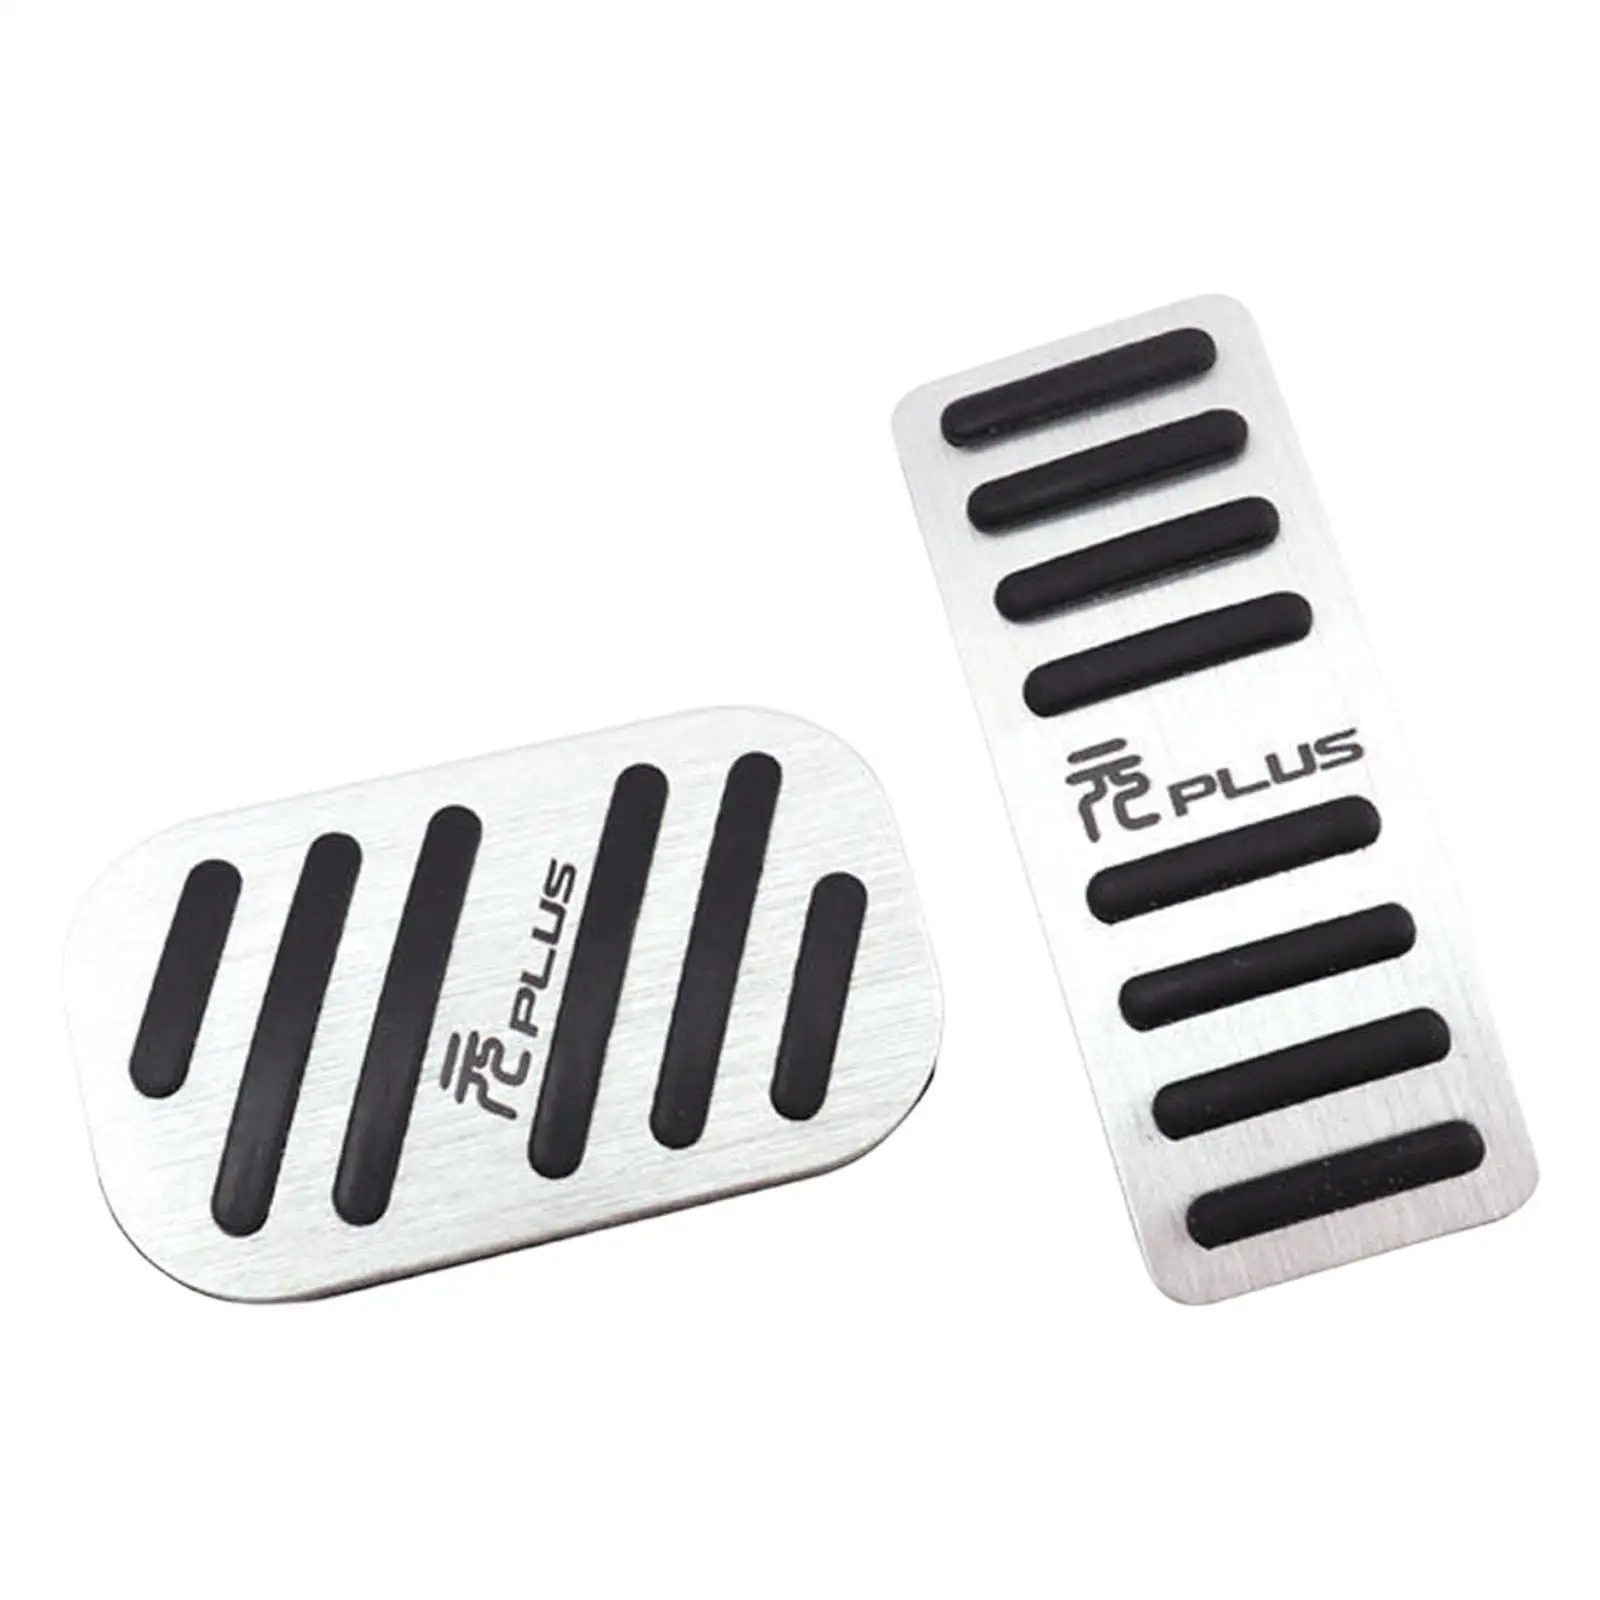 Gas Brake Pedal Cover Set Foot Pedals Pads for Byd Atto 3 Yuan Plus Replacement